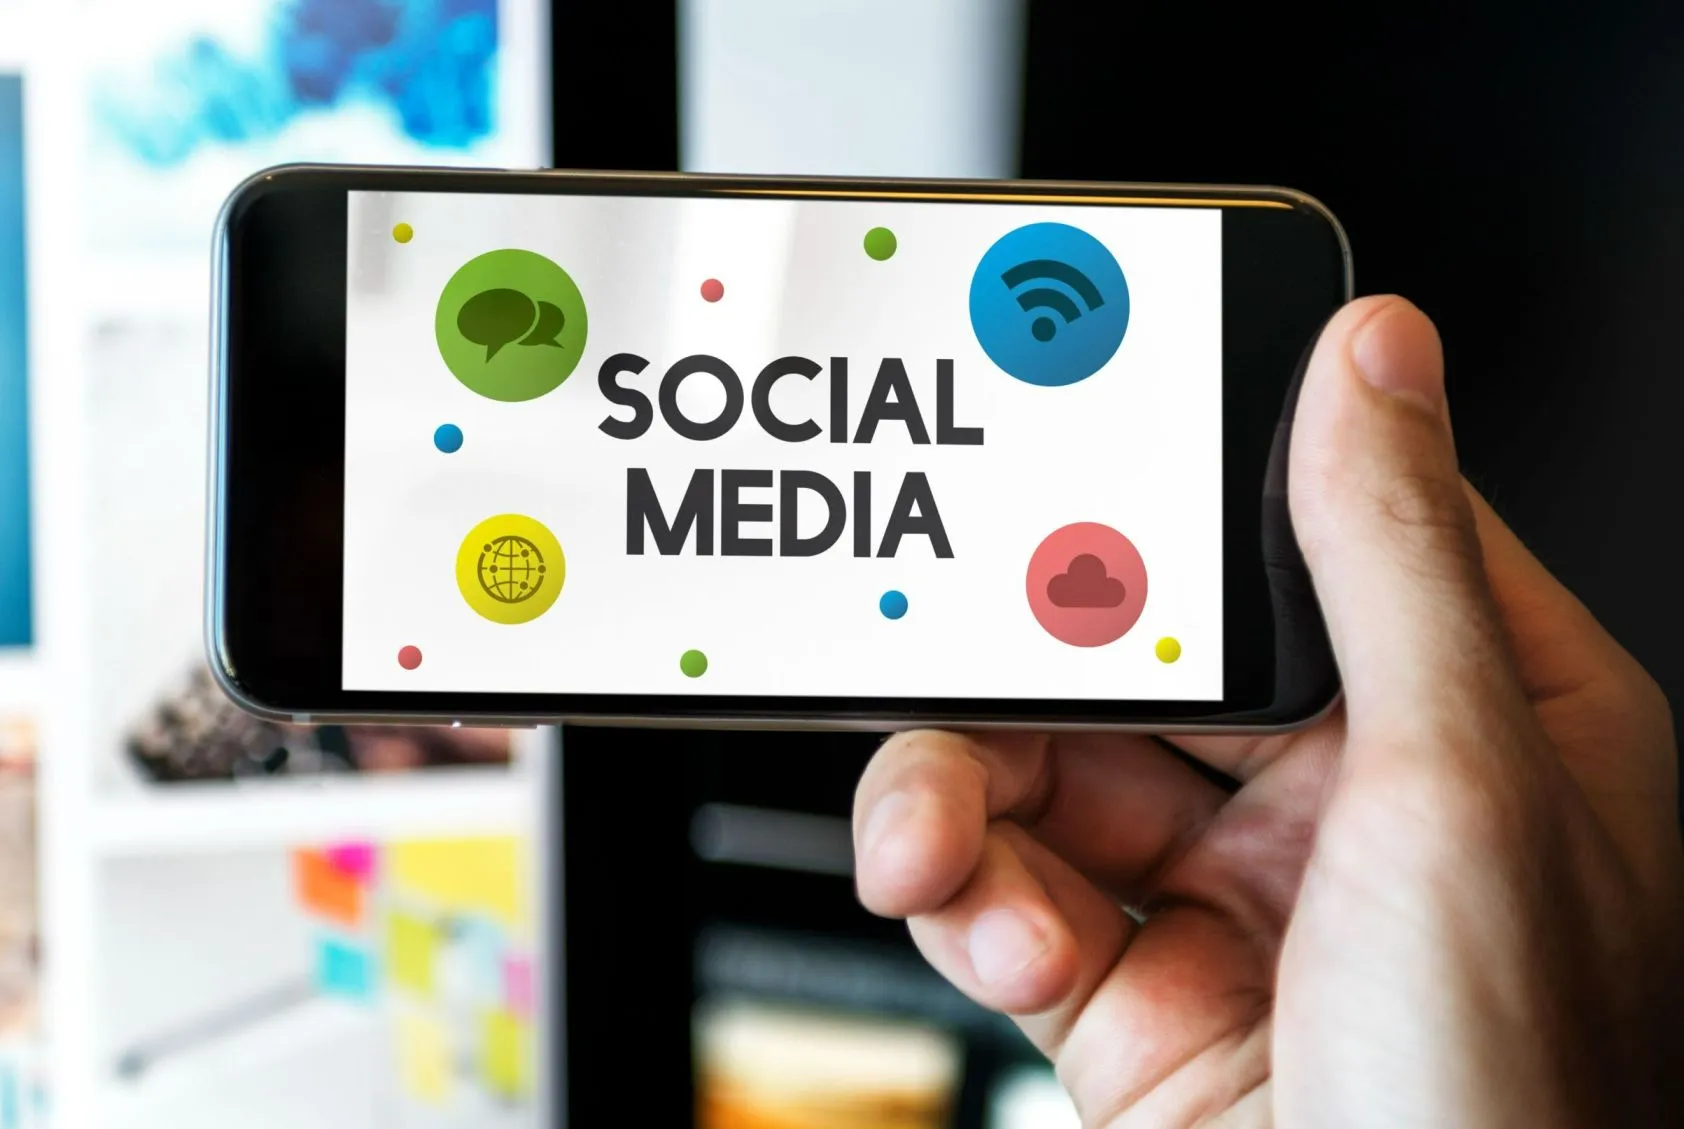 10 Must-Have Social Media Marketing Tools for 2023